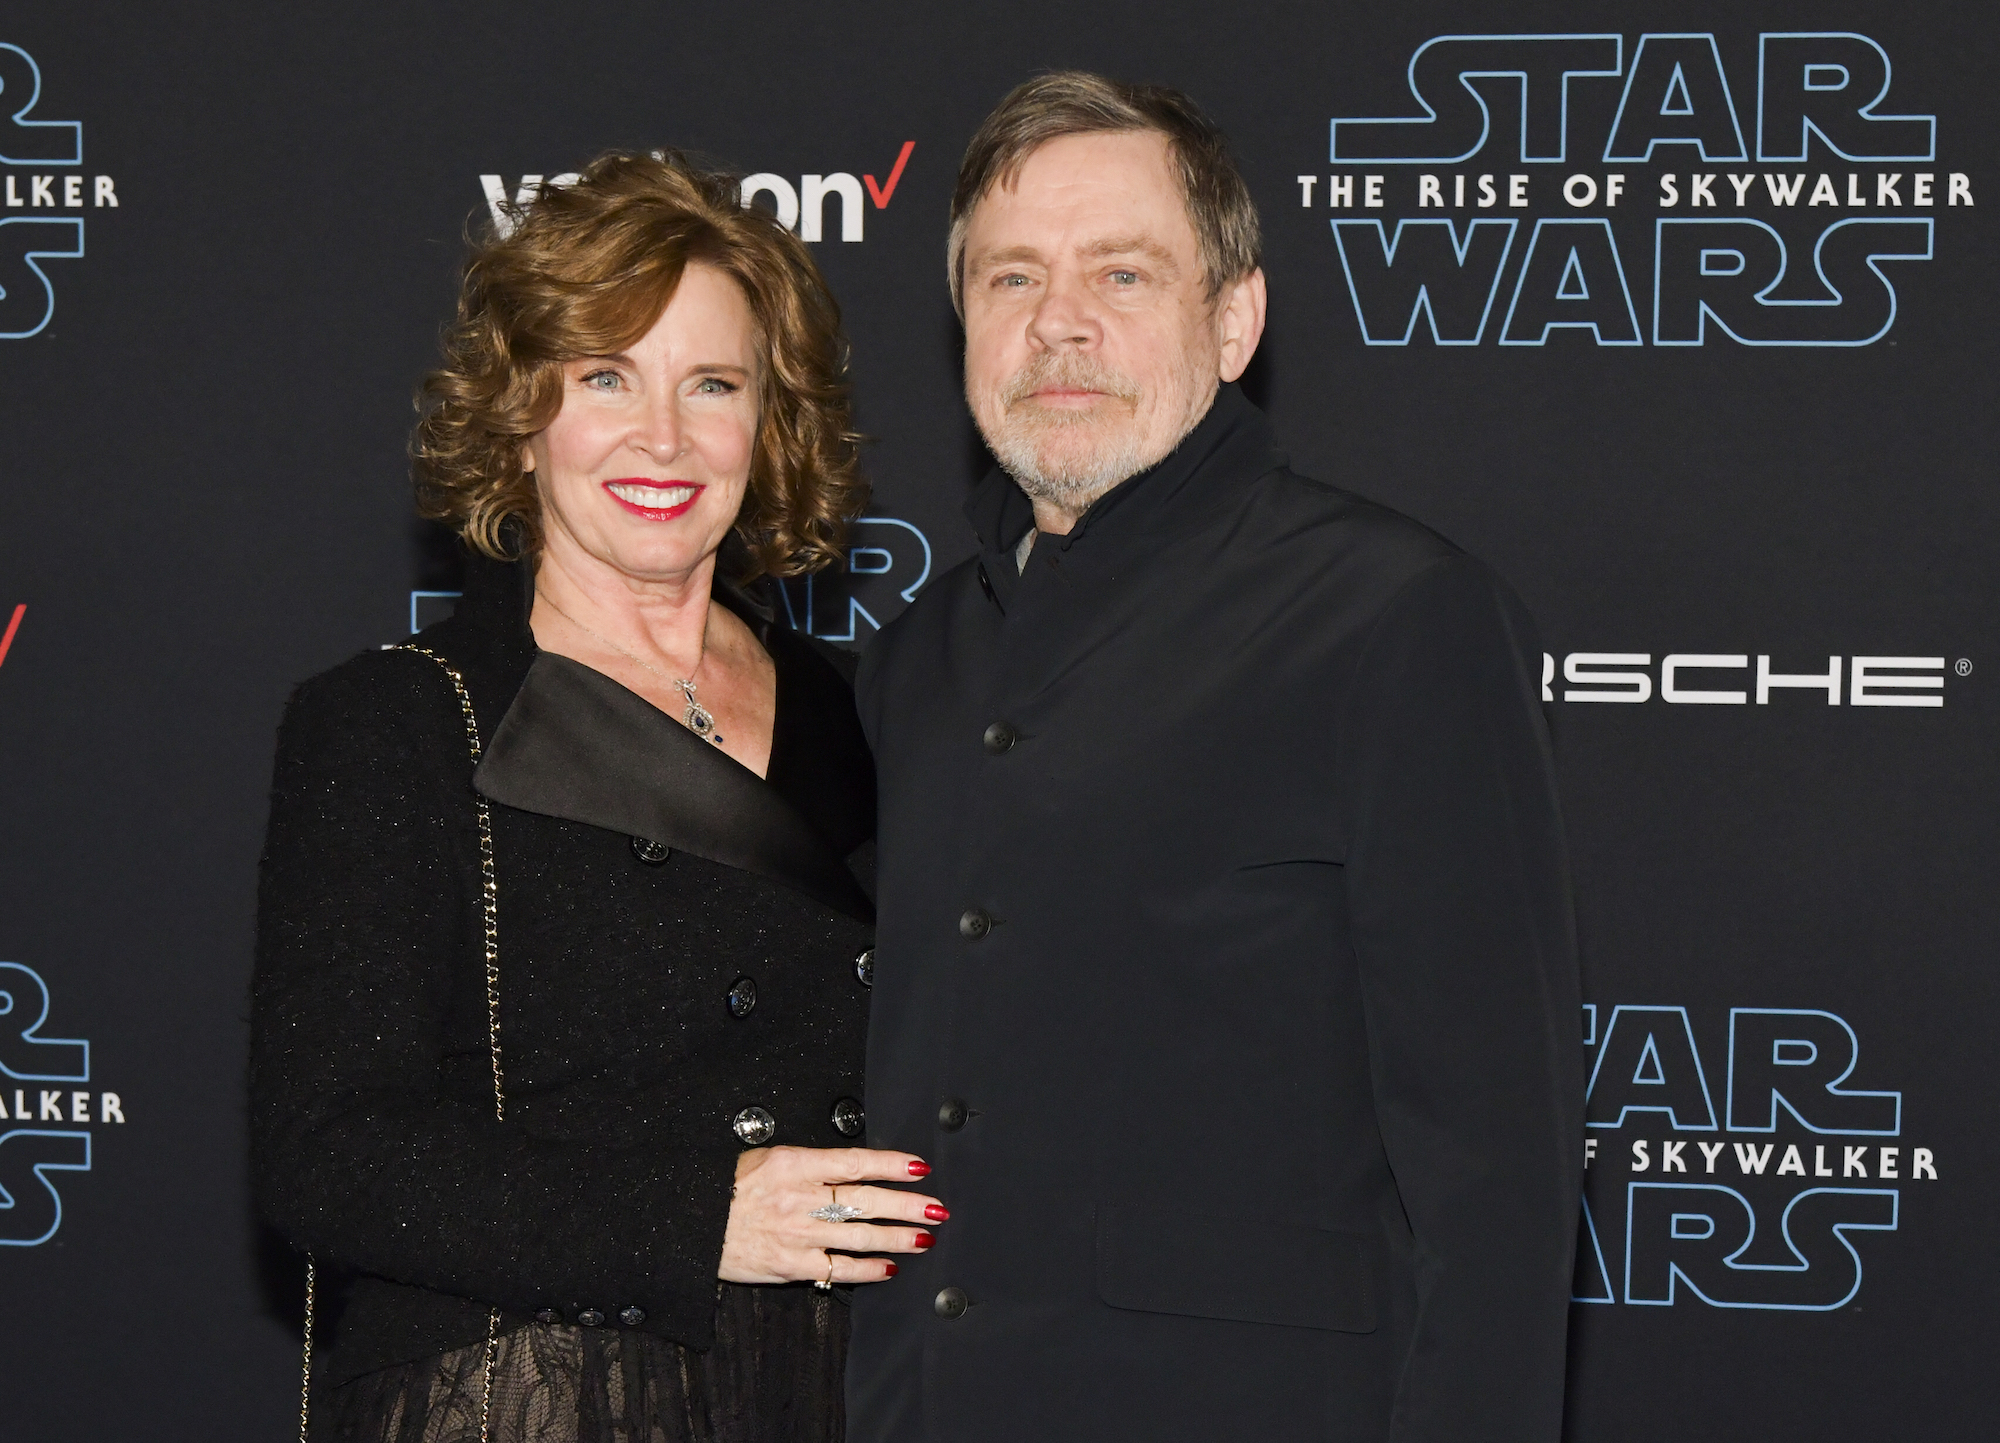 Marilou York and Mark Hamill smilng in front of a dark background with a repeating Star Wars logo